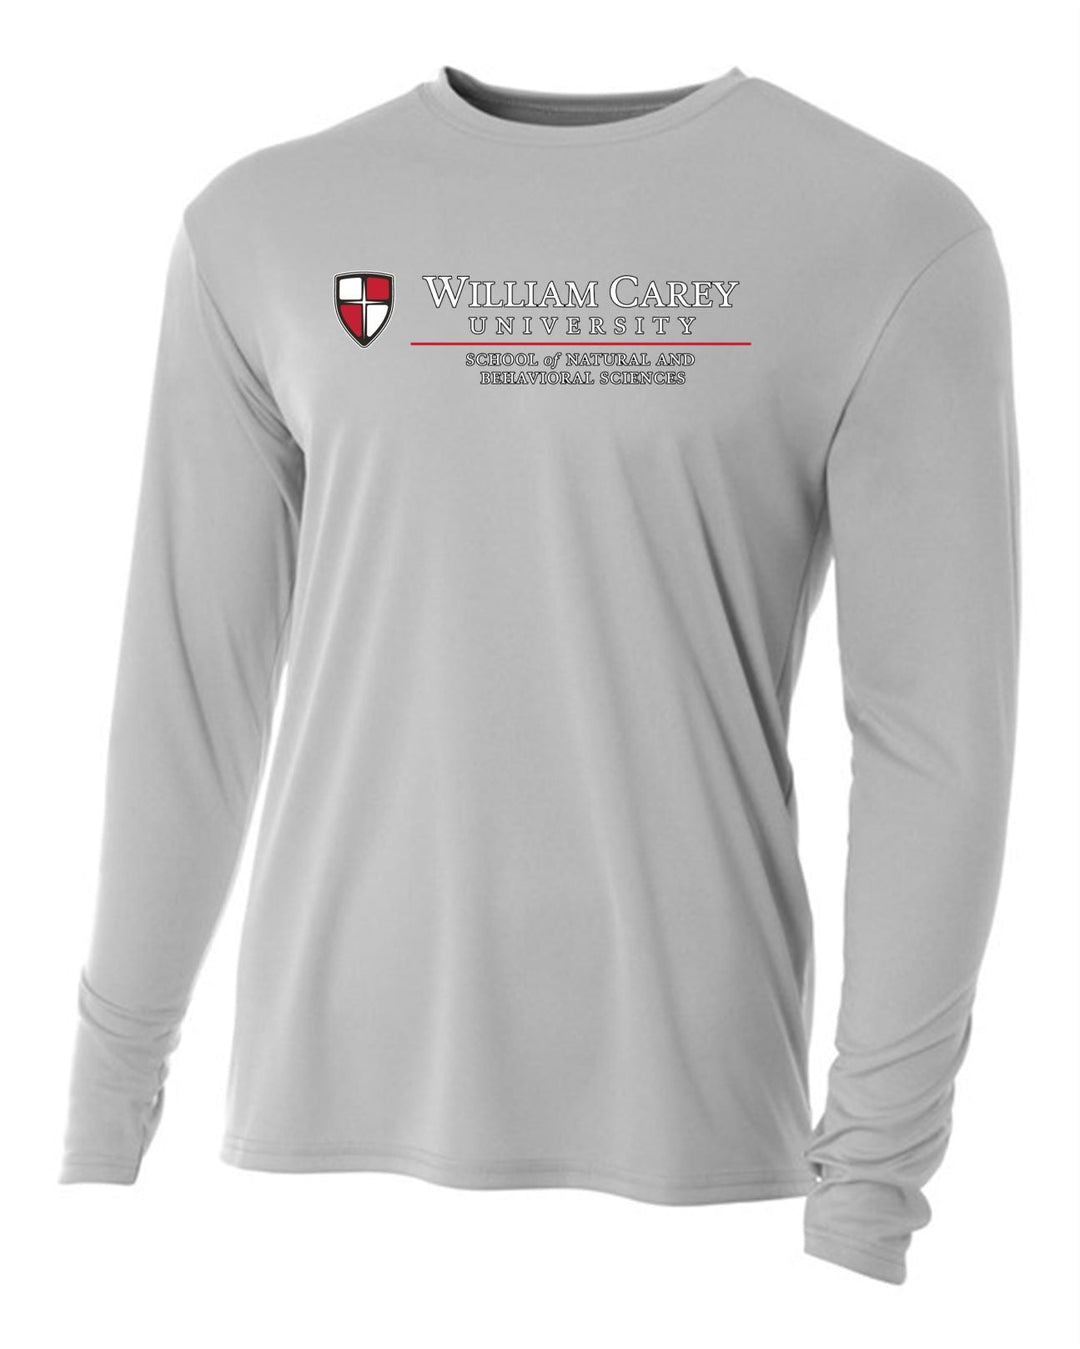 WCU School Of Natural & Behavioral Sciences Youth Long-Sleeve Performance Shirt WCU NBS Silver Grey Youth Small - Third Coast Soccer